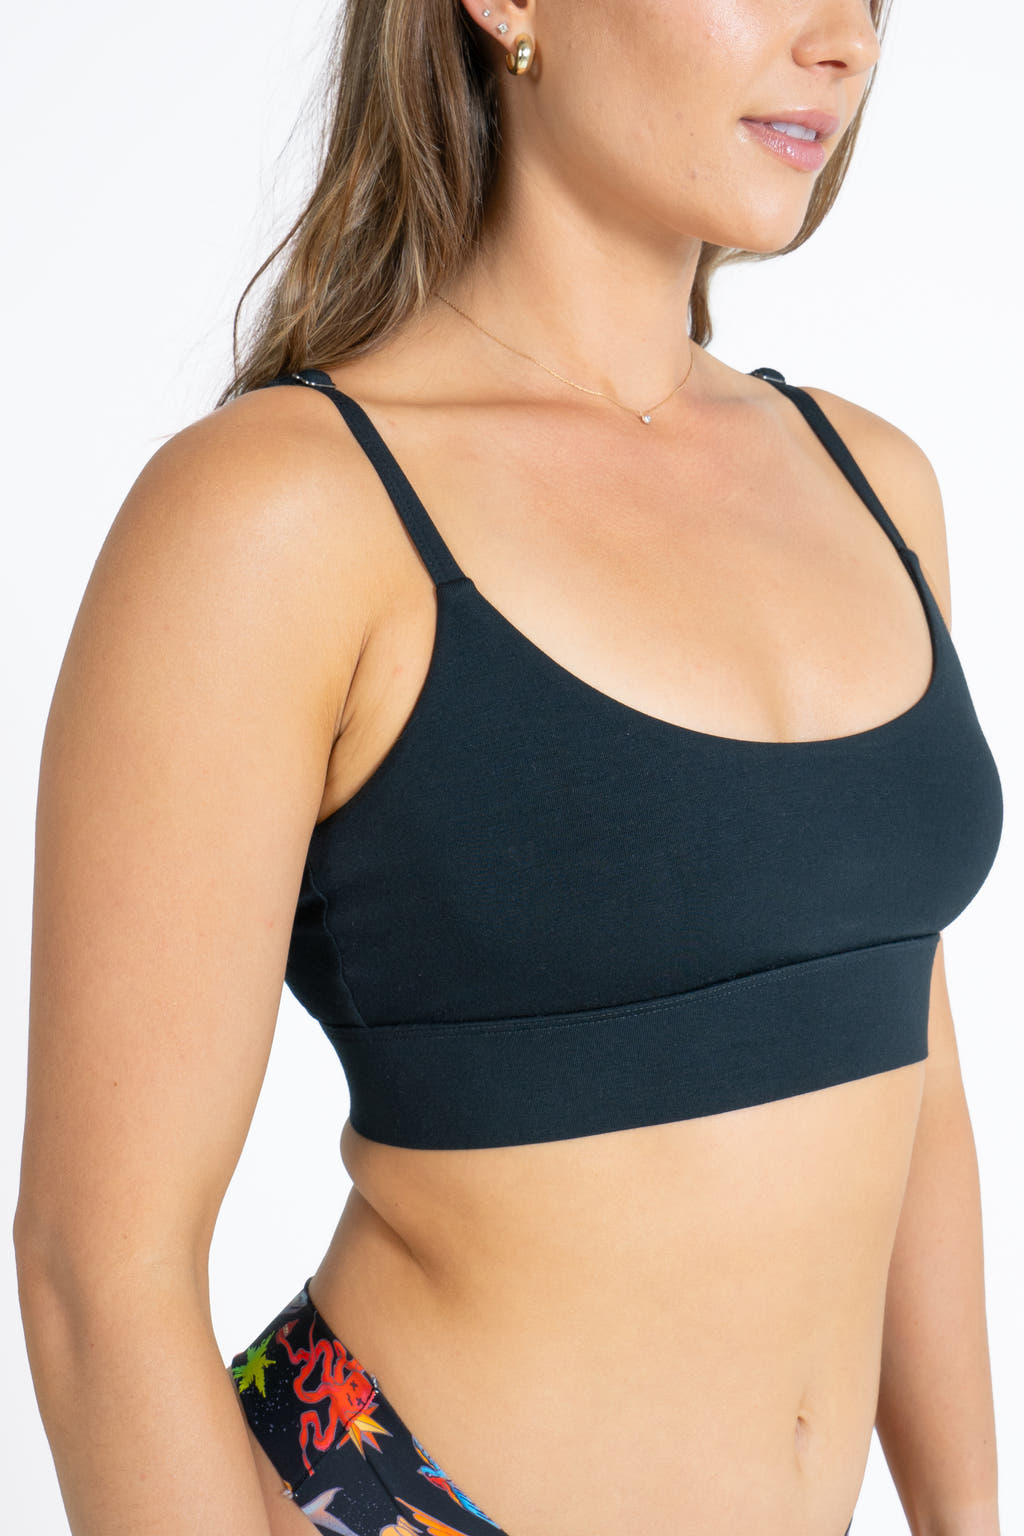 A close-up of The Threat Level Midnight Black Strappy Bralette on a woman's body.